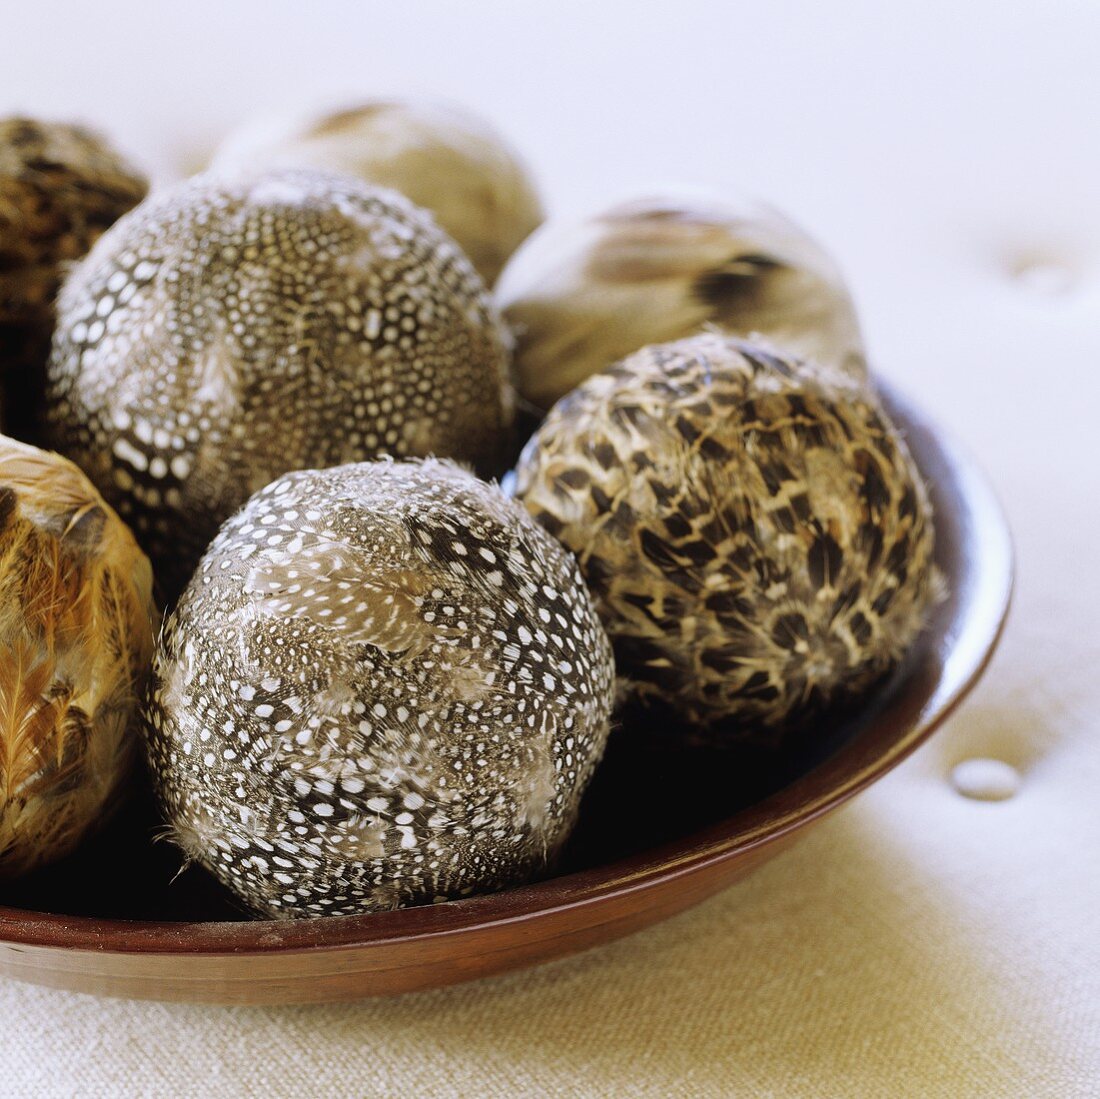 Brown and white patterned feathers on decorative balls in a wooden bowl